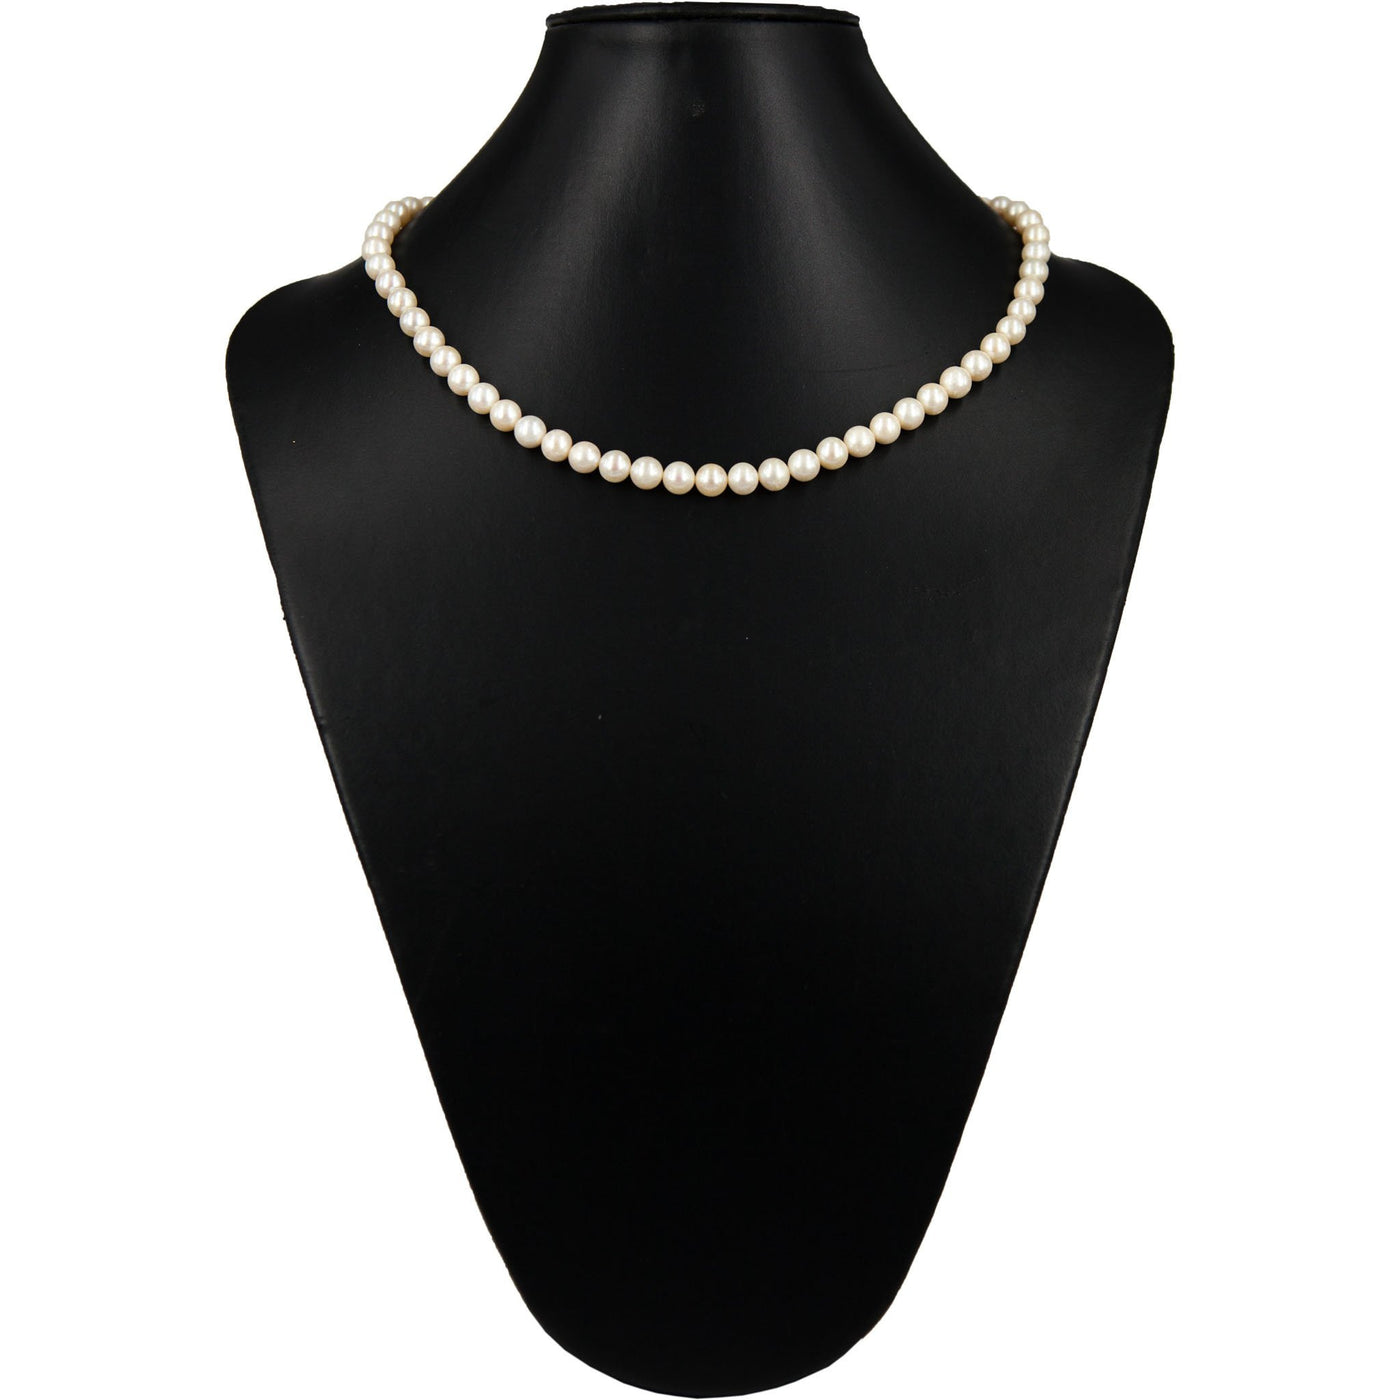 Genuine cultivation pearl necklace 44cm